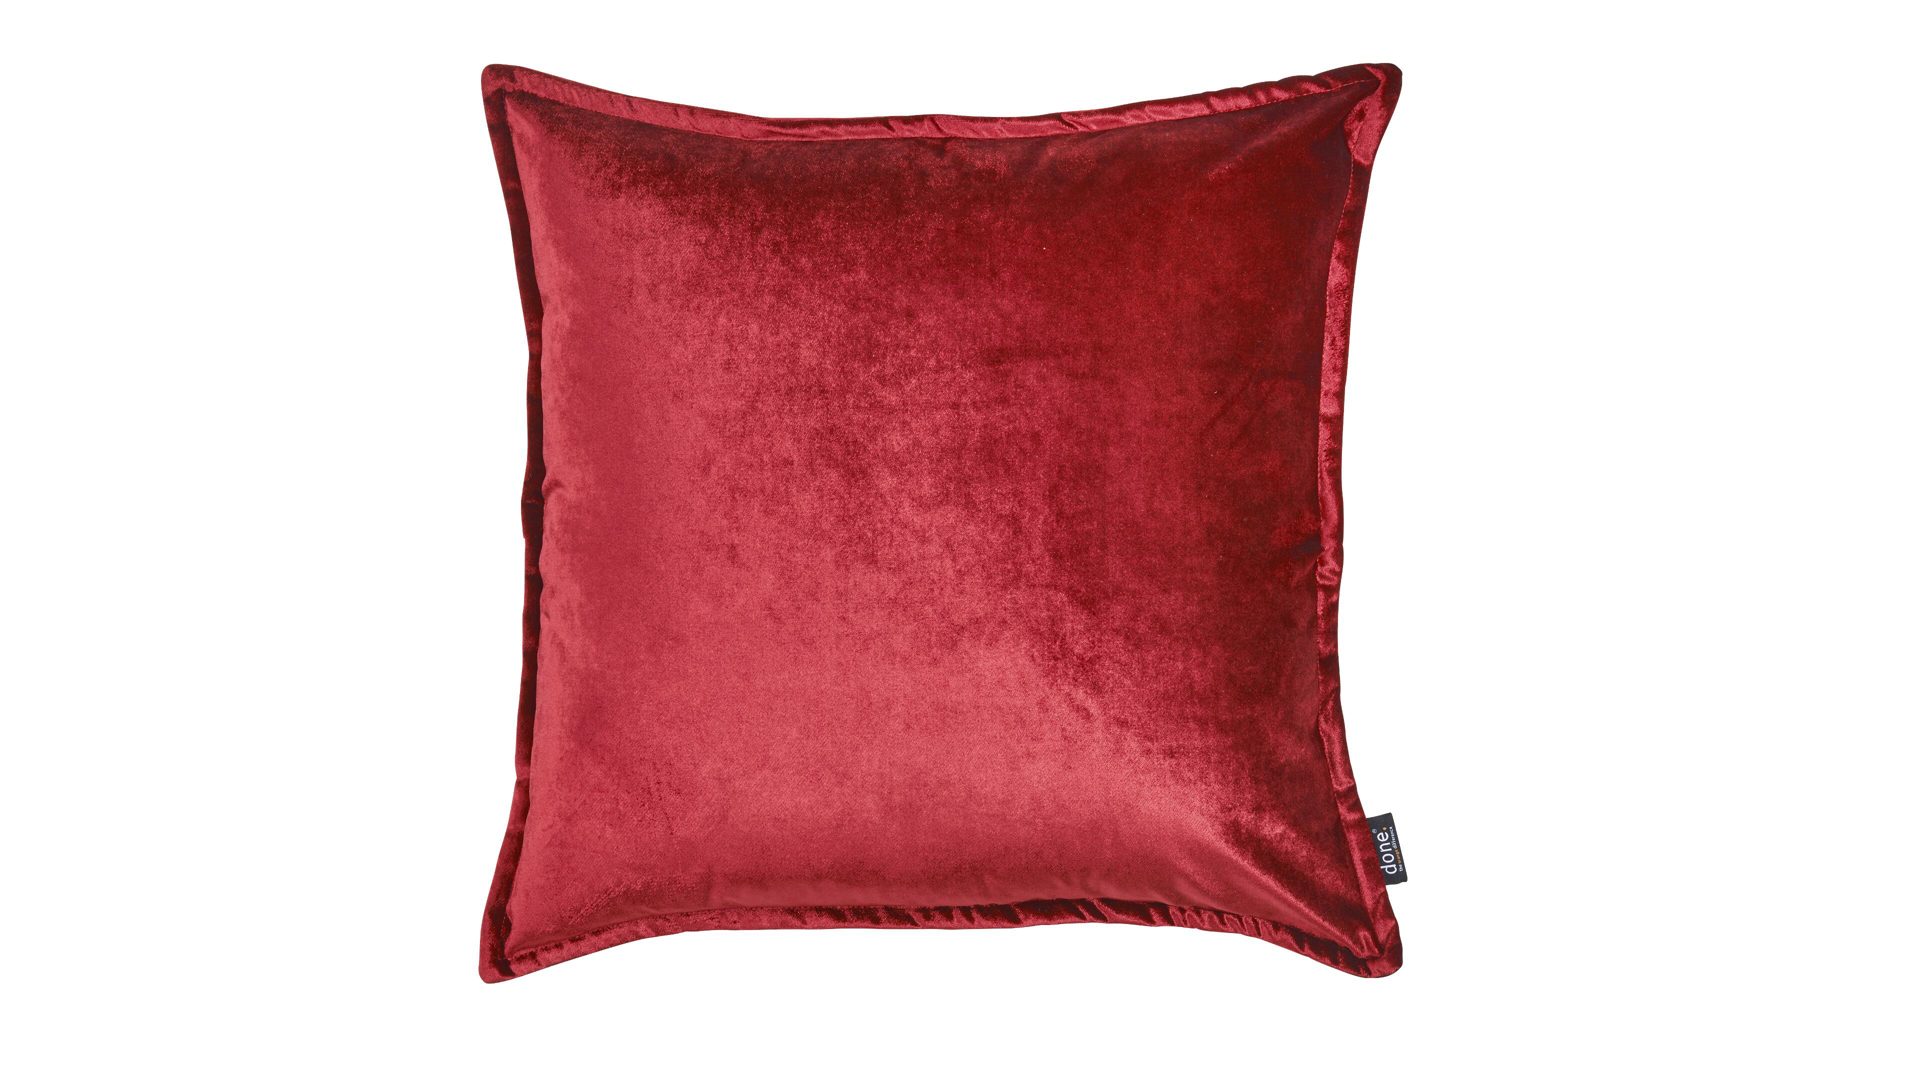 Kissenbezug /-hülle Done by karabel home company aus Stoff in Rot Done Kissenhülle Cushion Glam roter Samt – ca. 65 x 65 cm